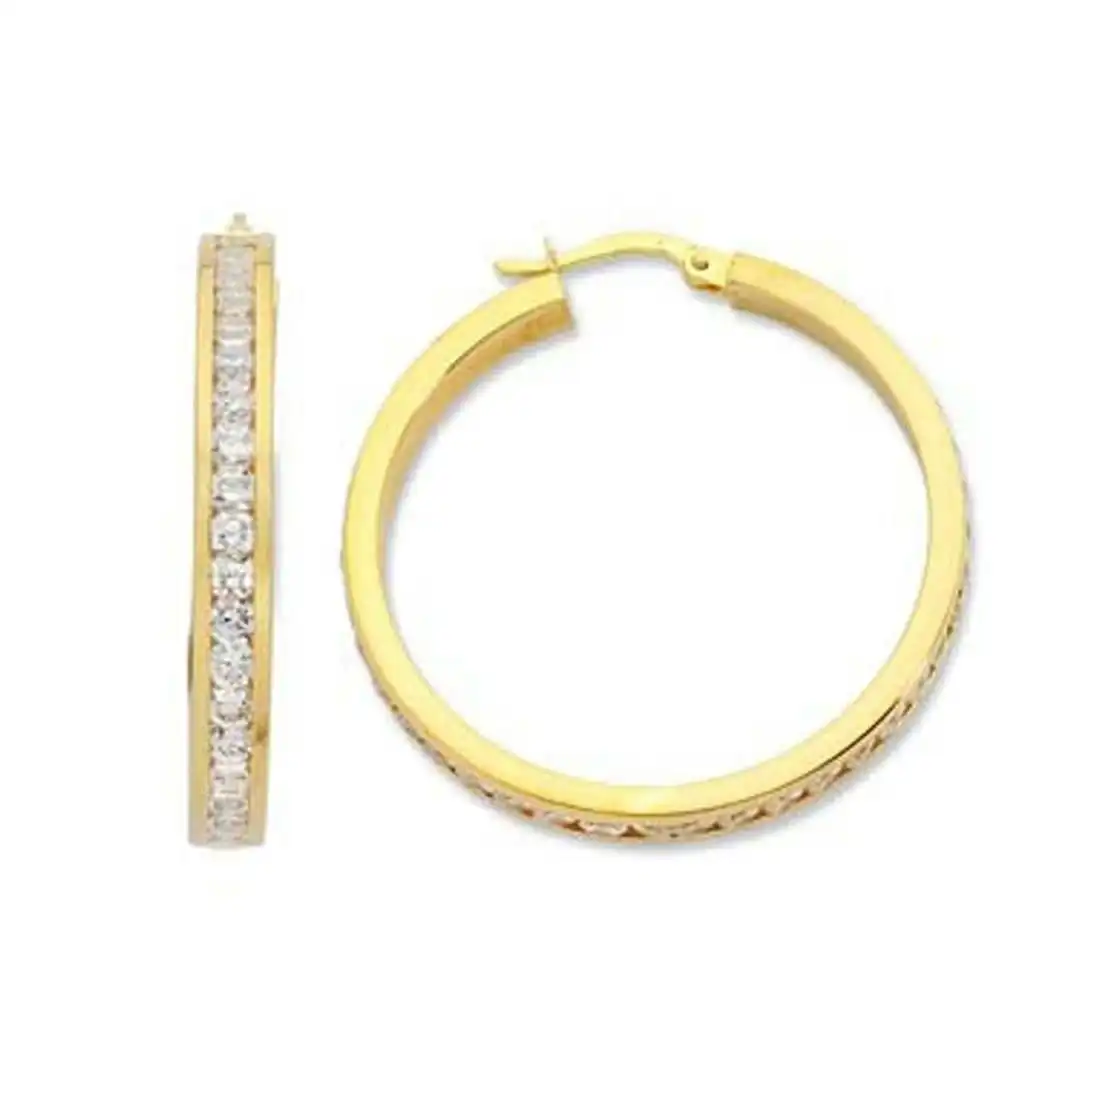 9ct Yellow Gold Silver Infused Cubic Zirconia 35mm Hoop Earrings